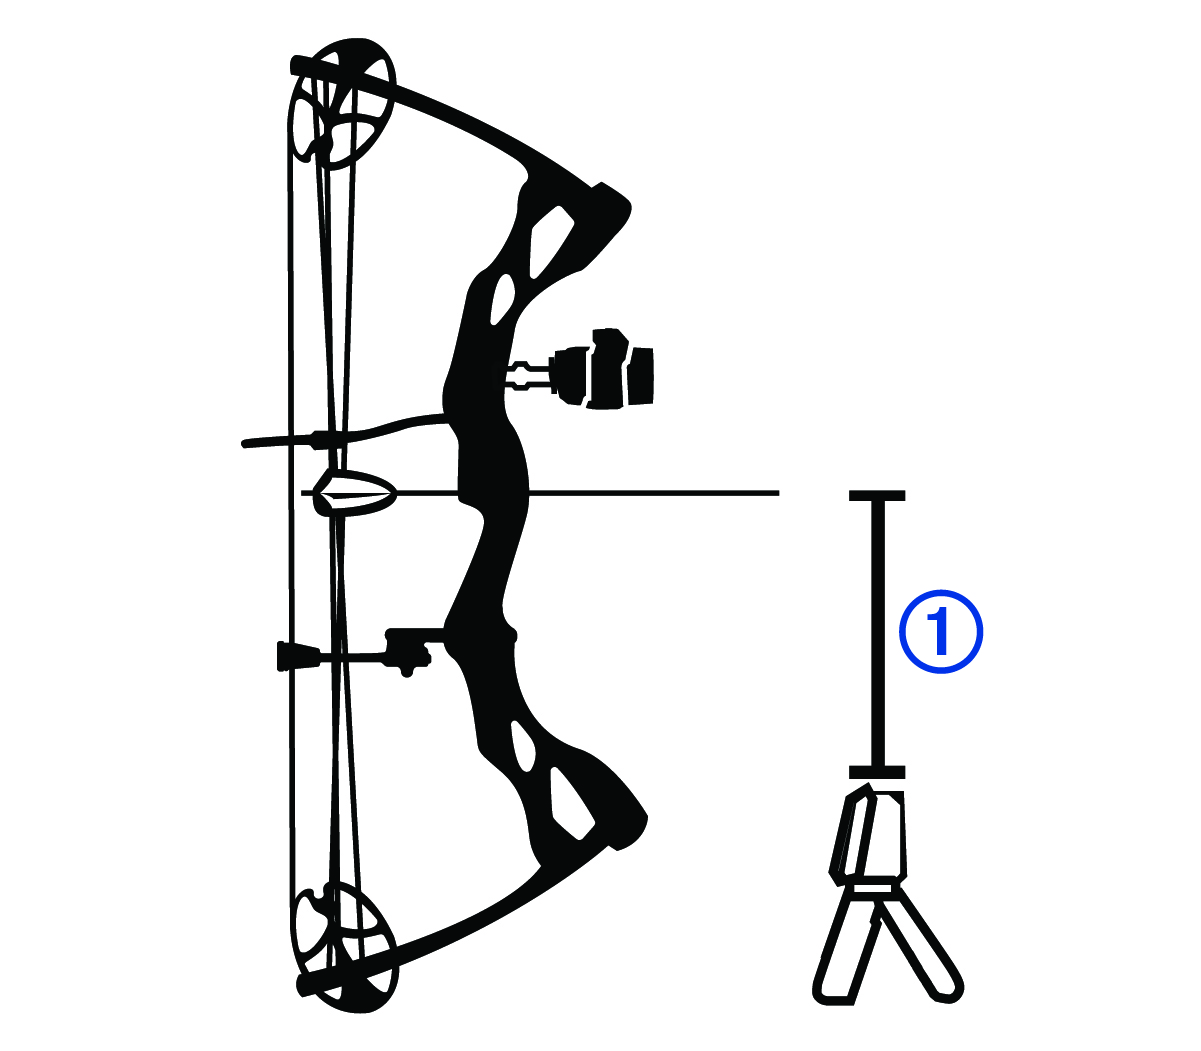 Bow alignment diagram with a callout